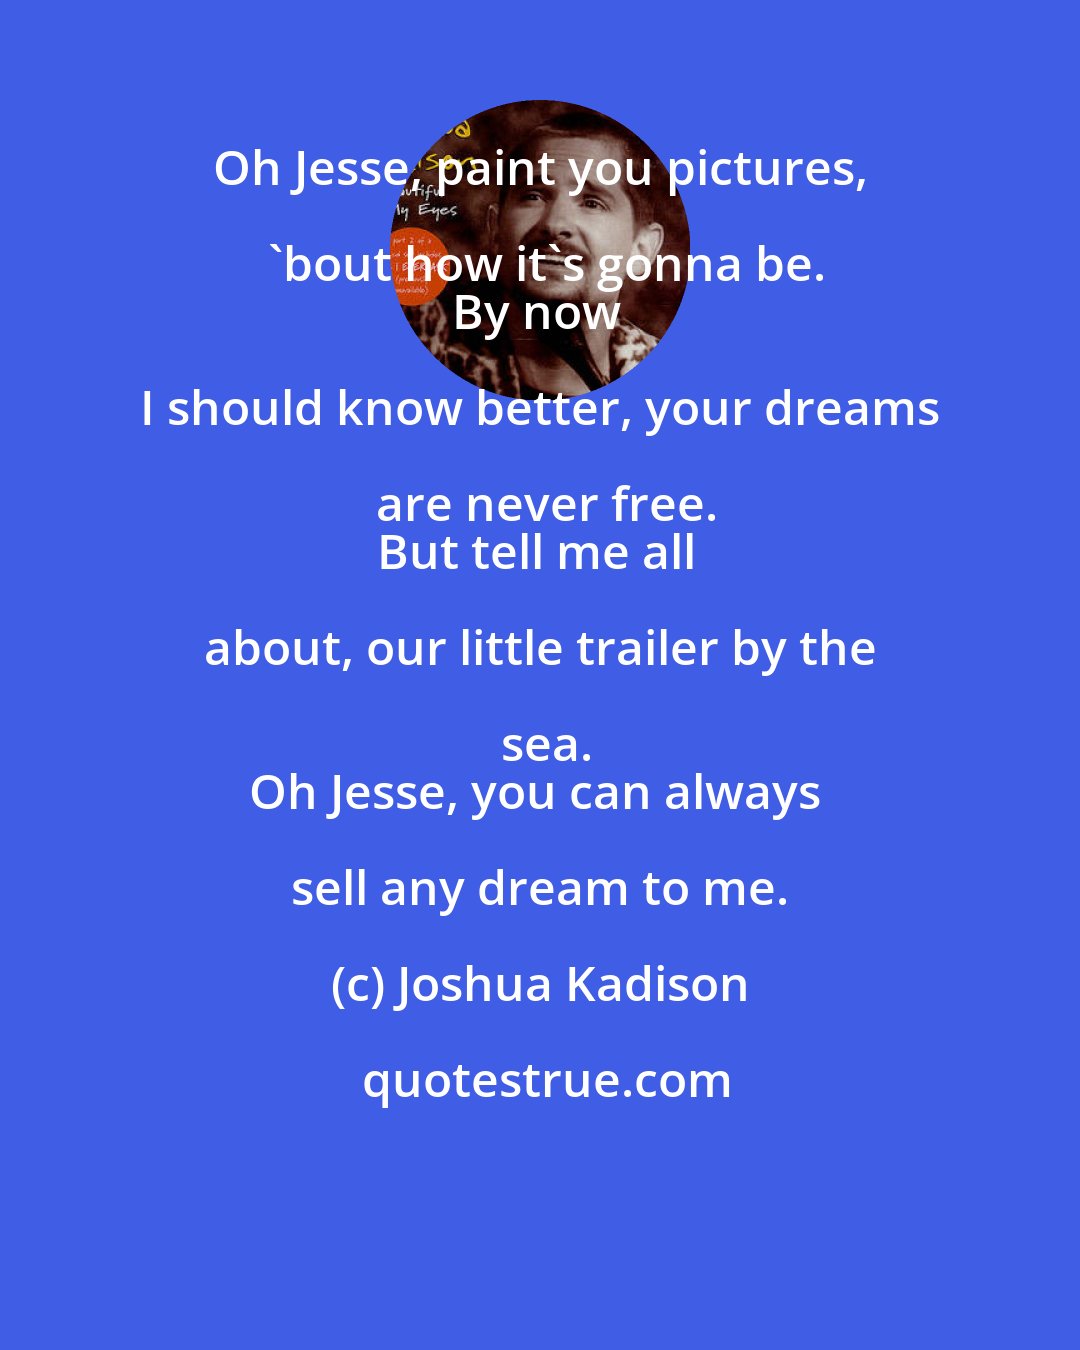 Joshua Kadison: Oh Jesse, paint you pictures, 'bout how it's gonna be.
By now I should know better, your dreams are never free.
But tell me all about, our little trailer by the sea.
Oh Jesse, you can always sell any dream to me.